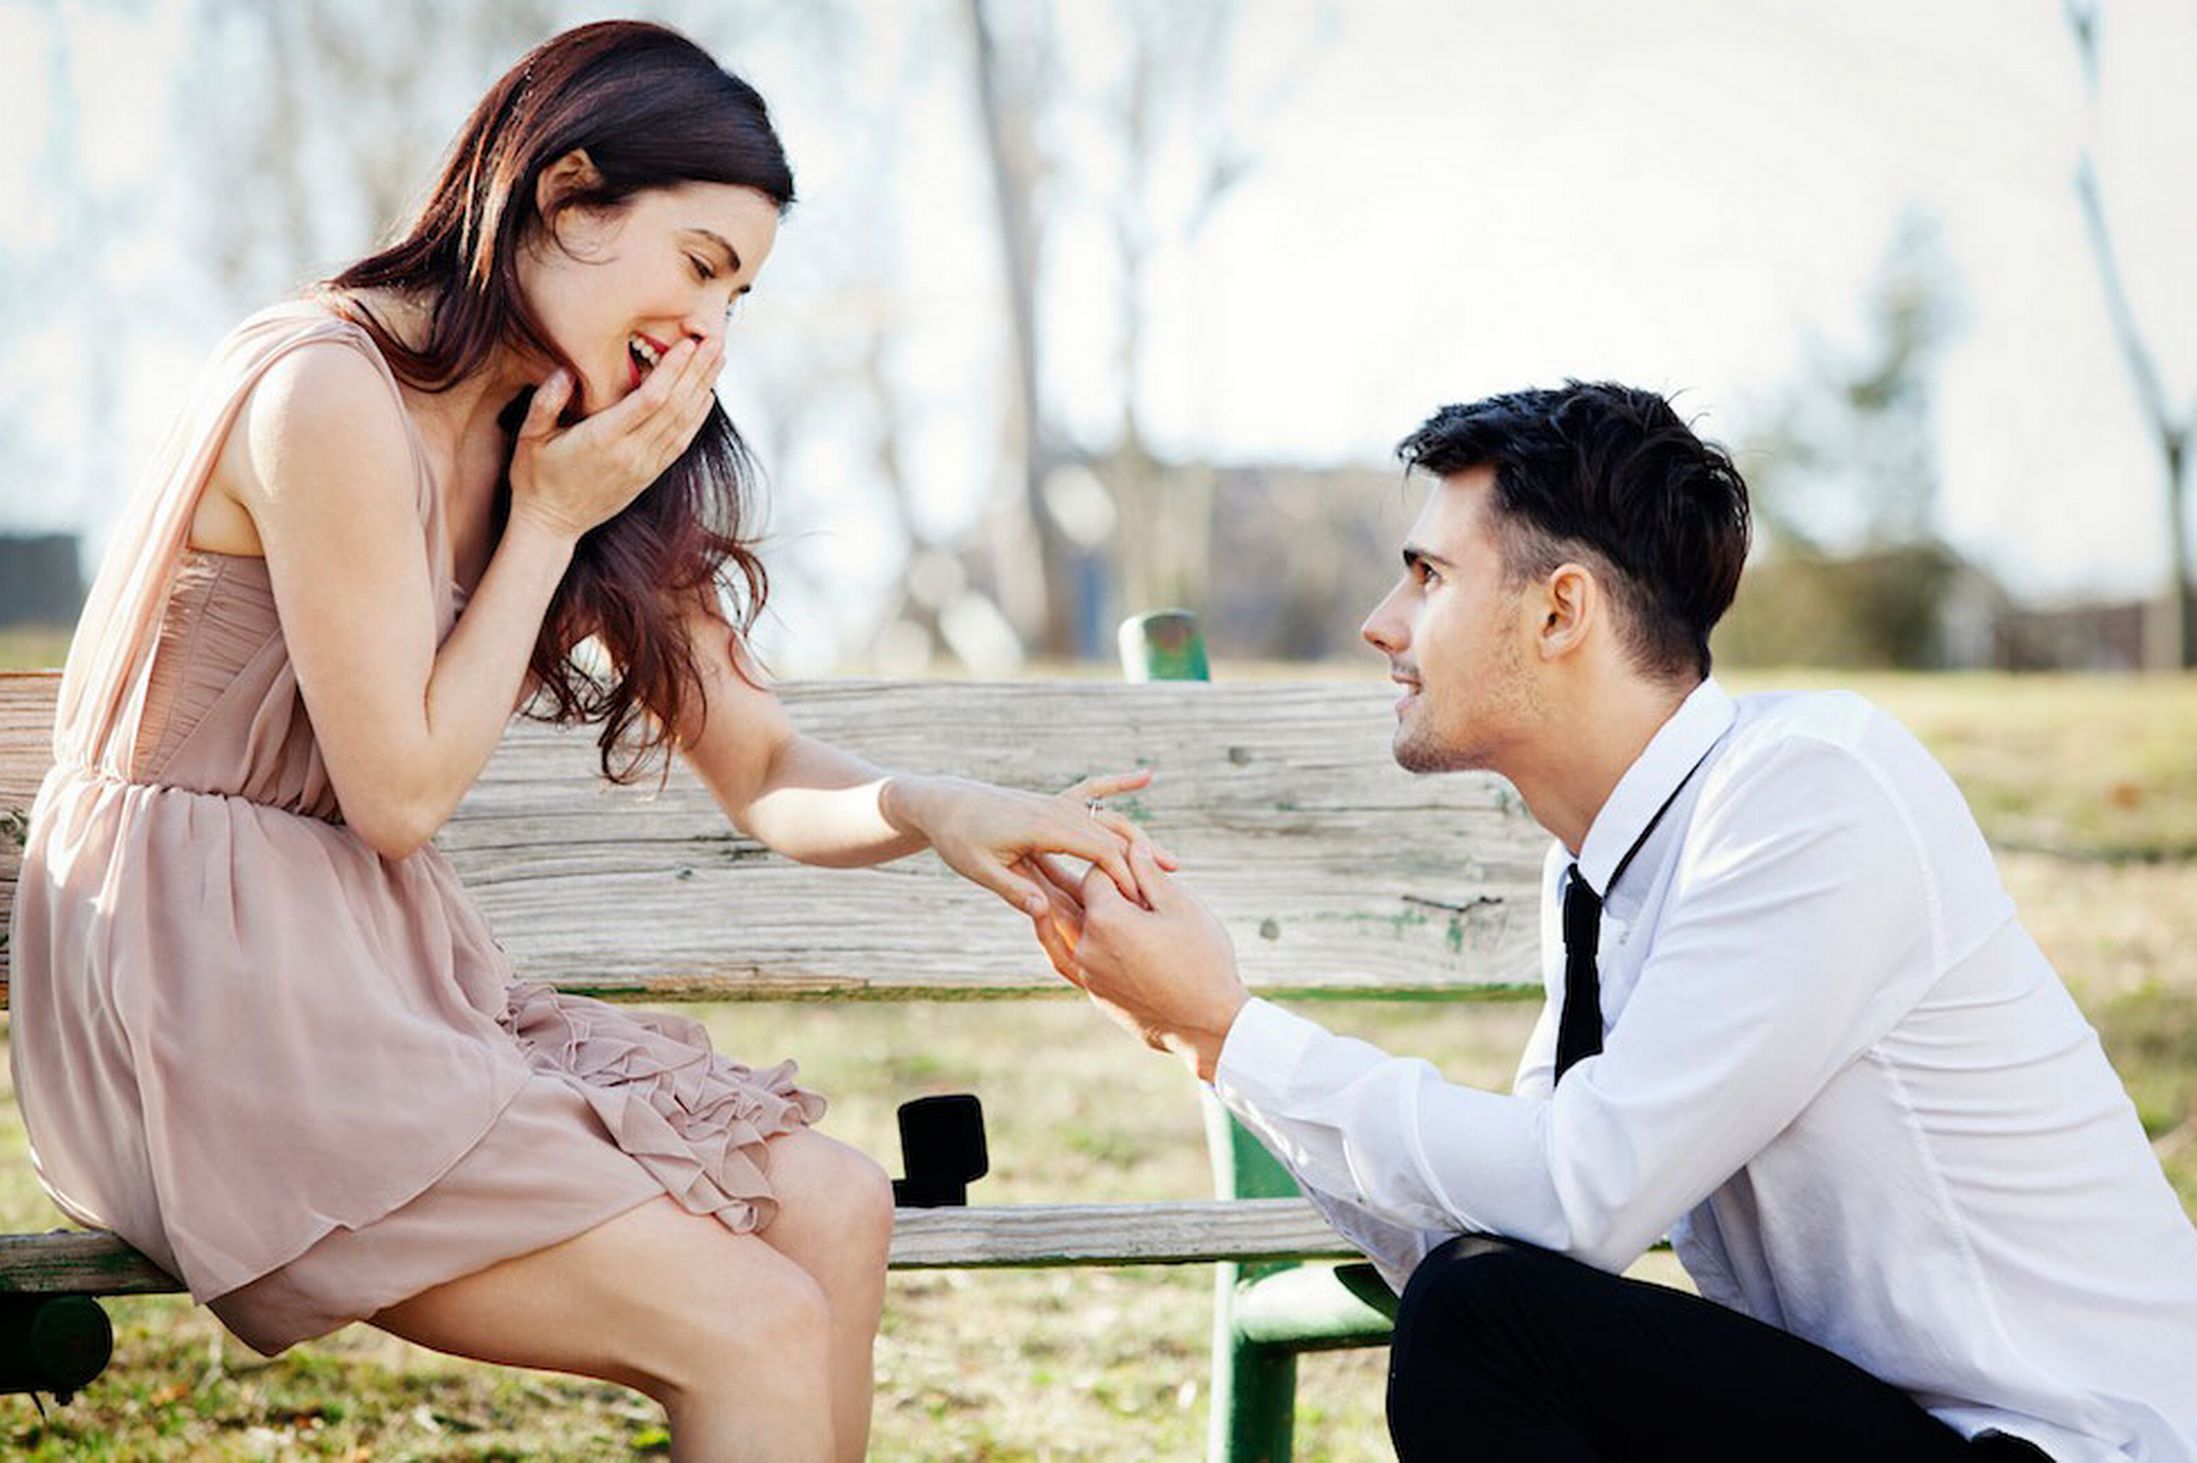 Marriage-proposal-3098880